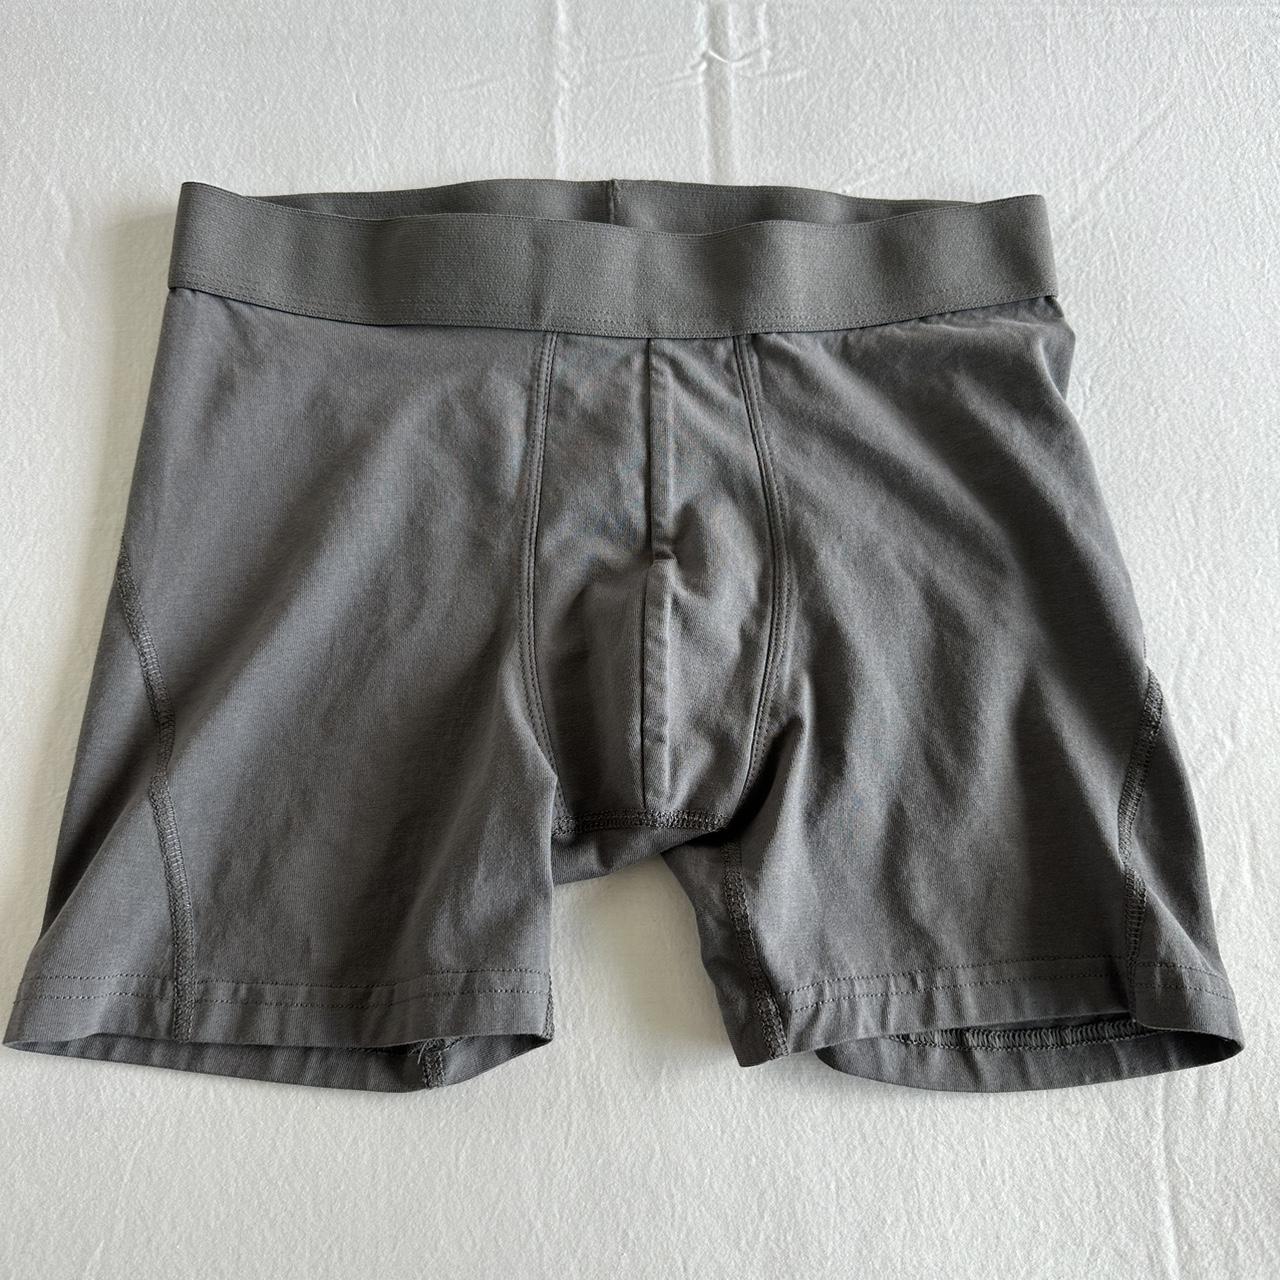 H&M Men's Black and Grey Boxers-and-briefs (5)